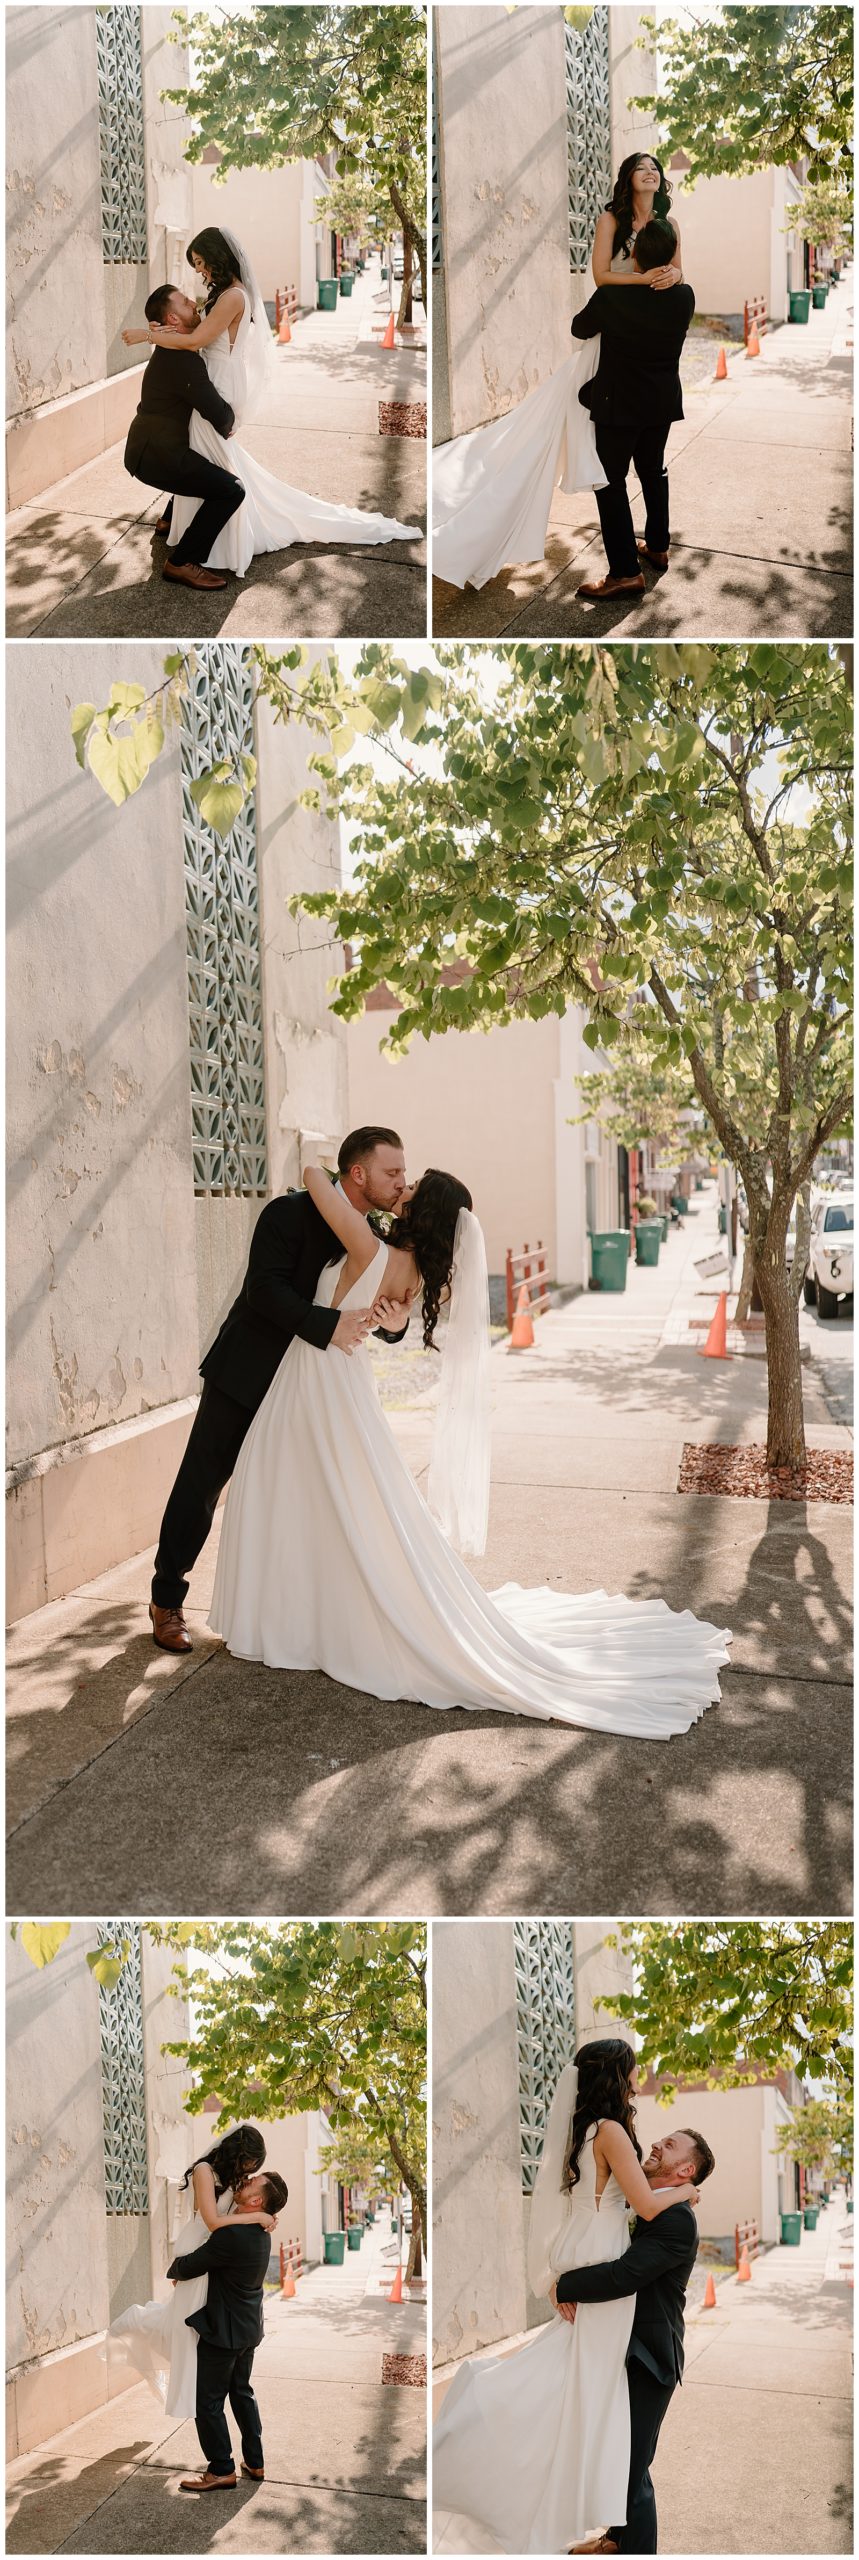 Bride and groom kissing and spinning during portraits at modern Winston-Salem summer wedding day